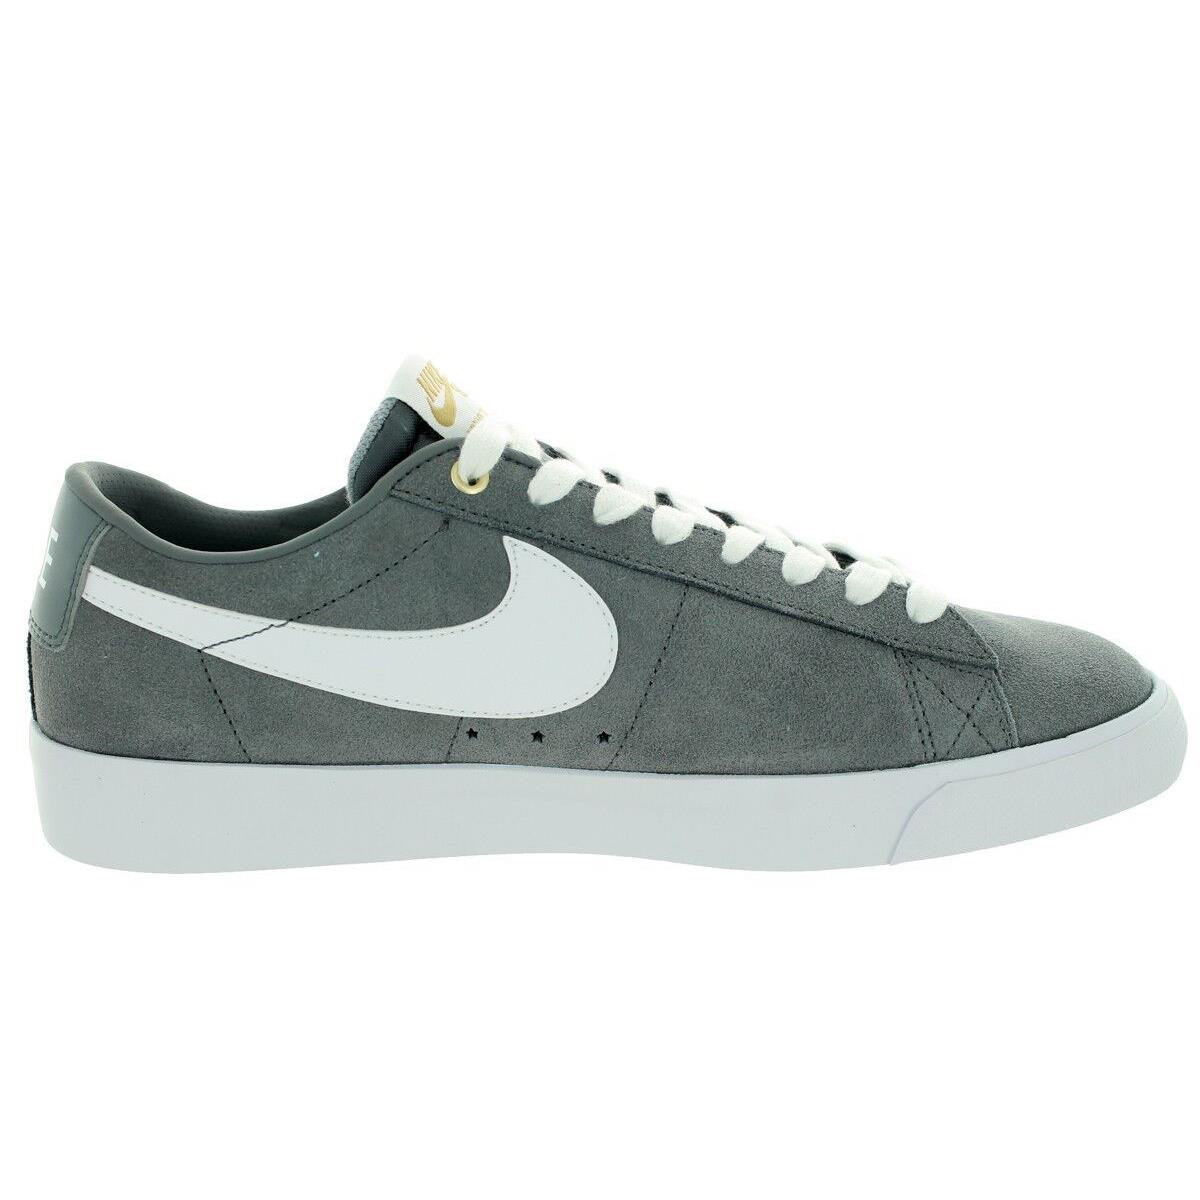 Nike shoes  - Grey /White , Cool Grey / White -Tide Pool Blue Manufacturer 0